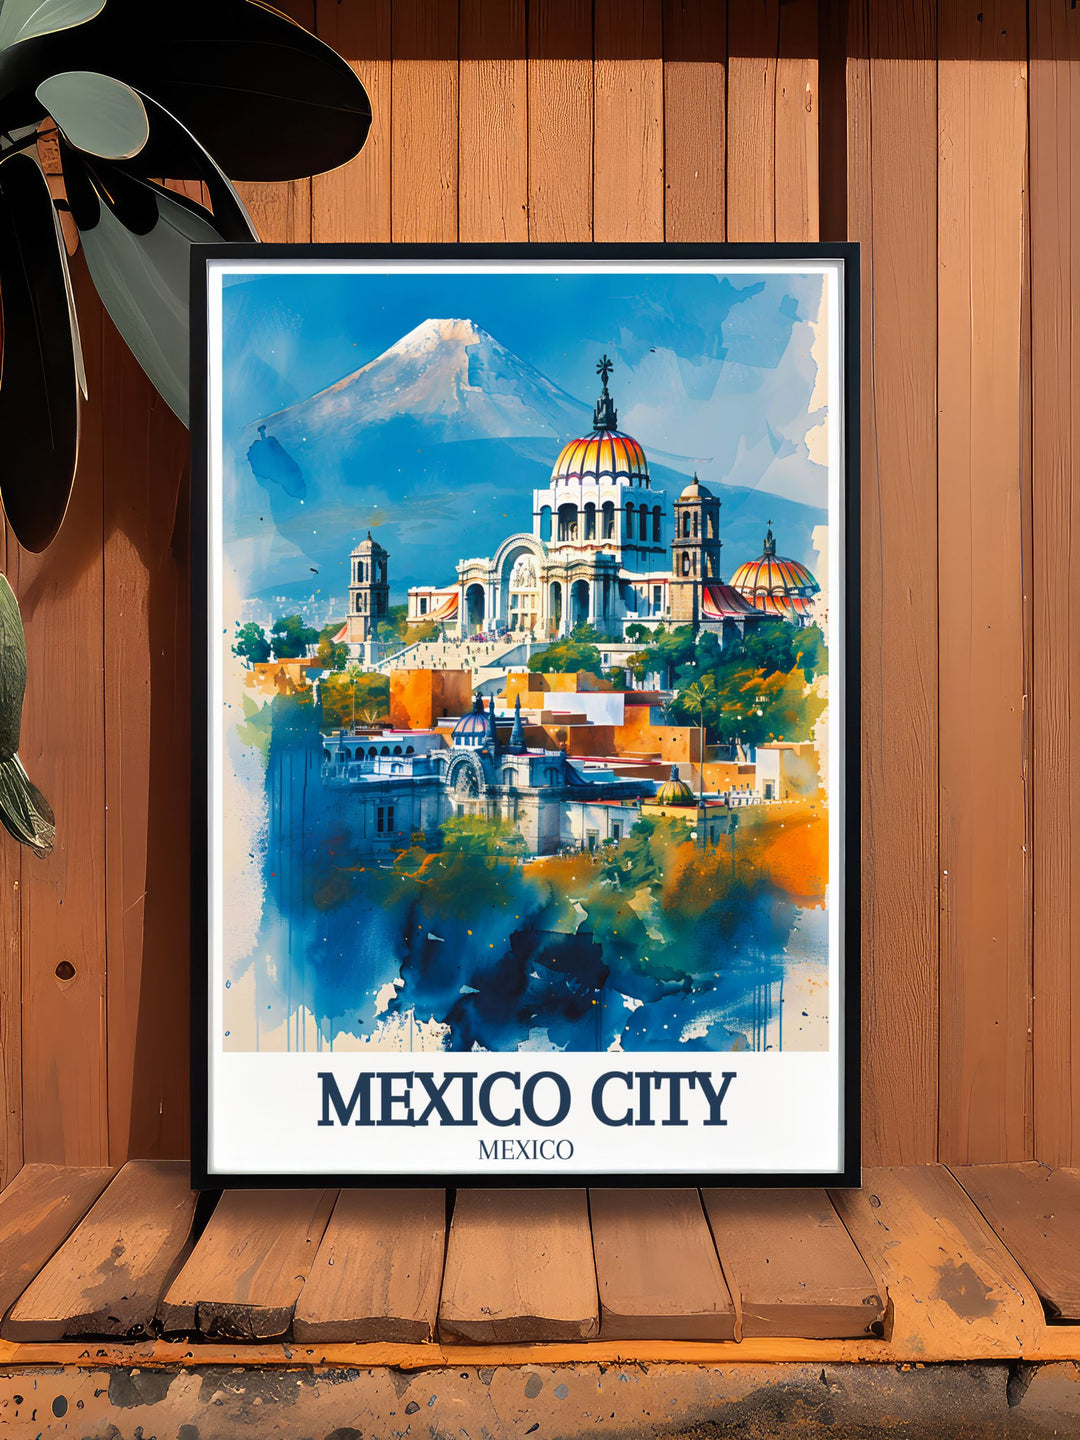 Detailed Mexico City wall art showcasing the Metropolitan cathedral Zocalo Chapultepec castle. This art print brings the vibrant energy and historical importance of Mexico Citys landmarks to life. Perfect for home or office decor.